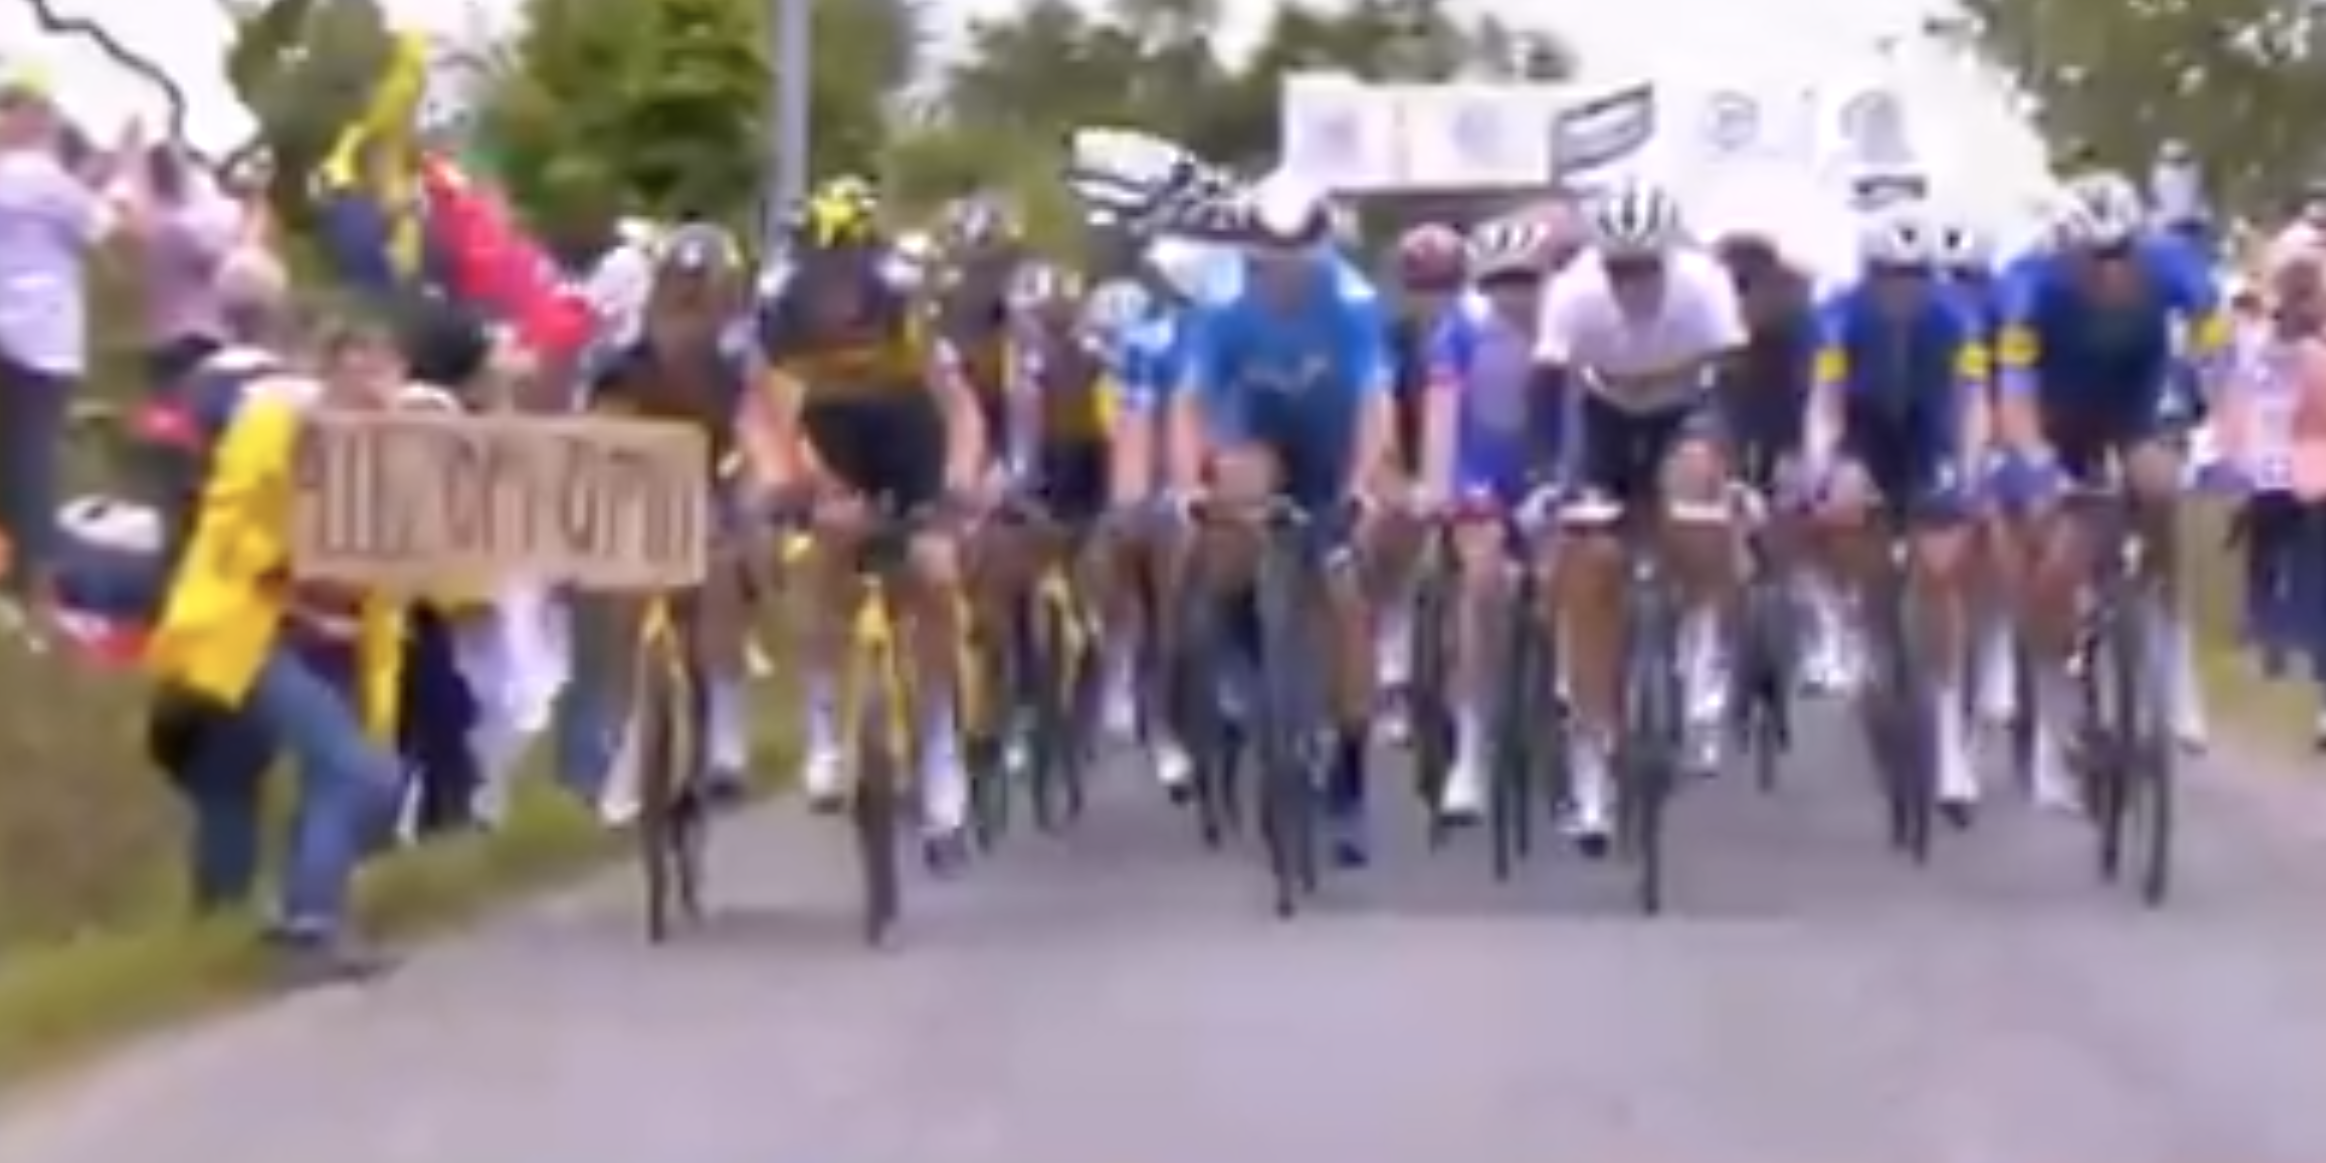 A woman holding a sign at the Tour de France caused a mass pileup.